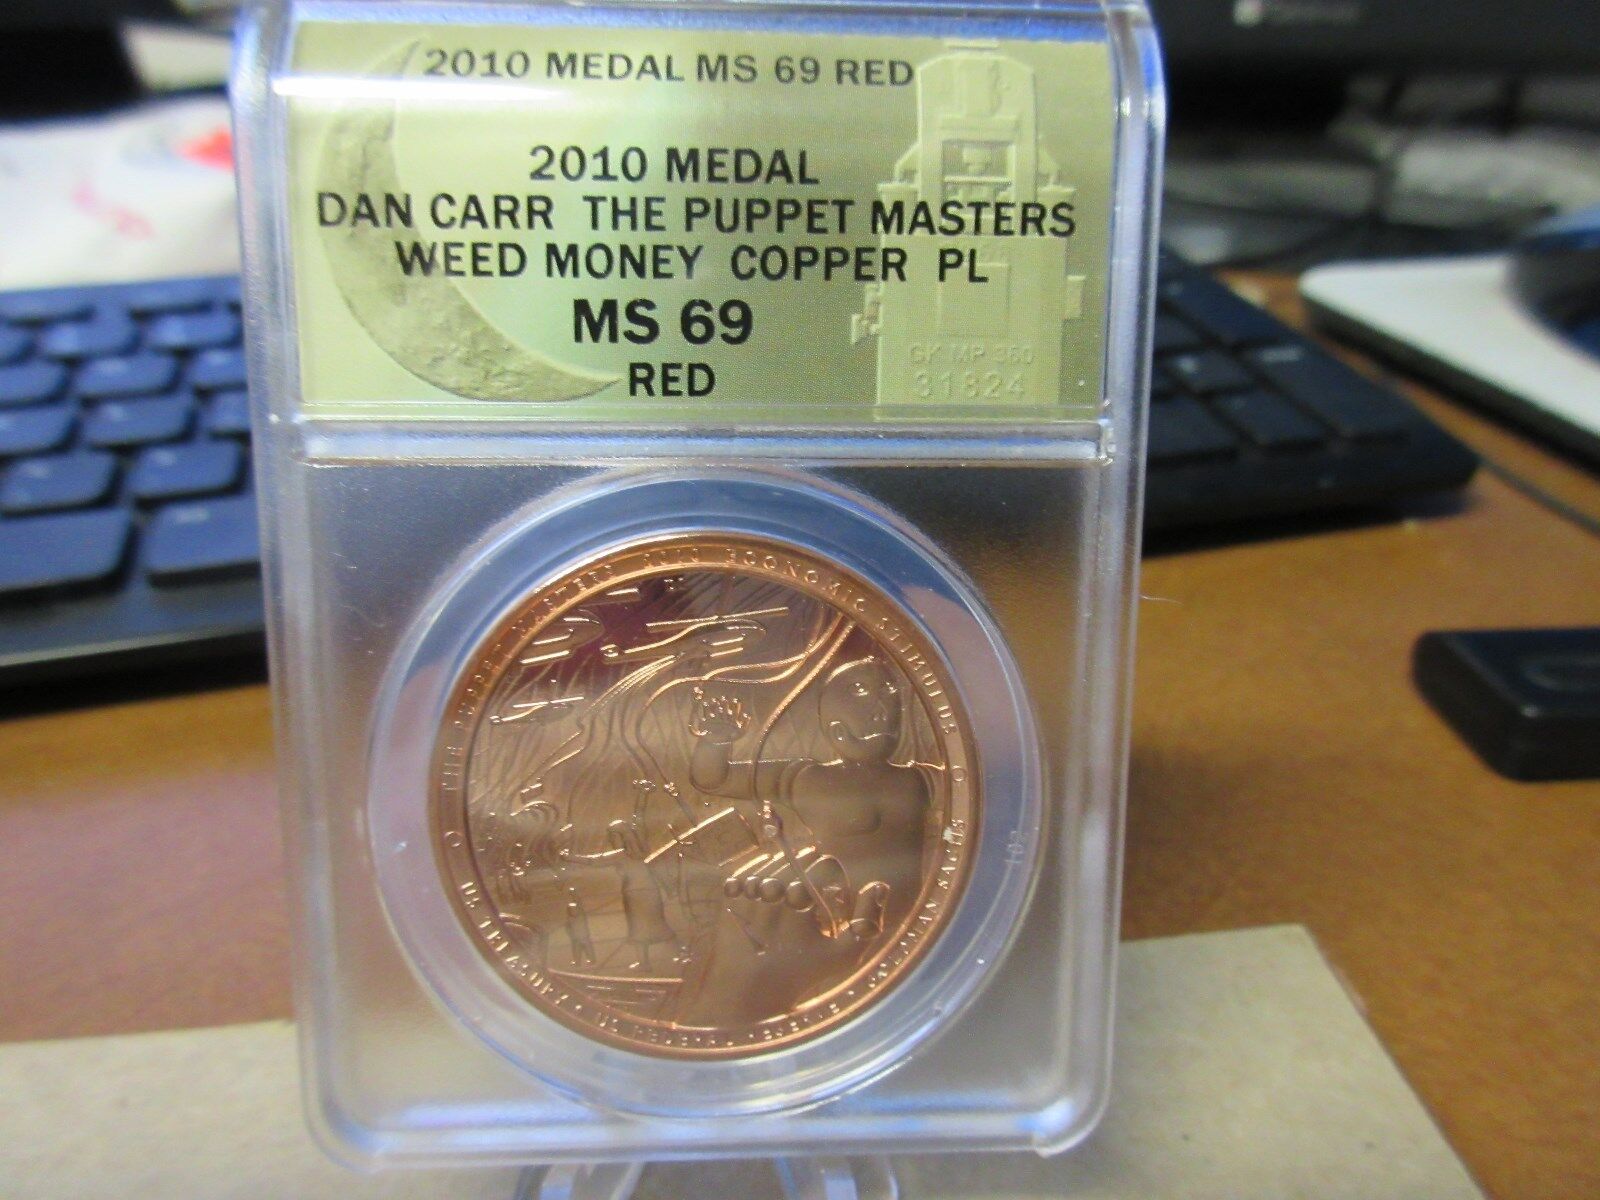 2010 Puppet Masters /  Weed Money HT Token by Daniel Carr  Coppe